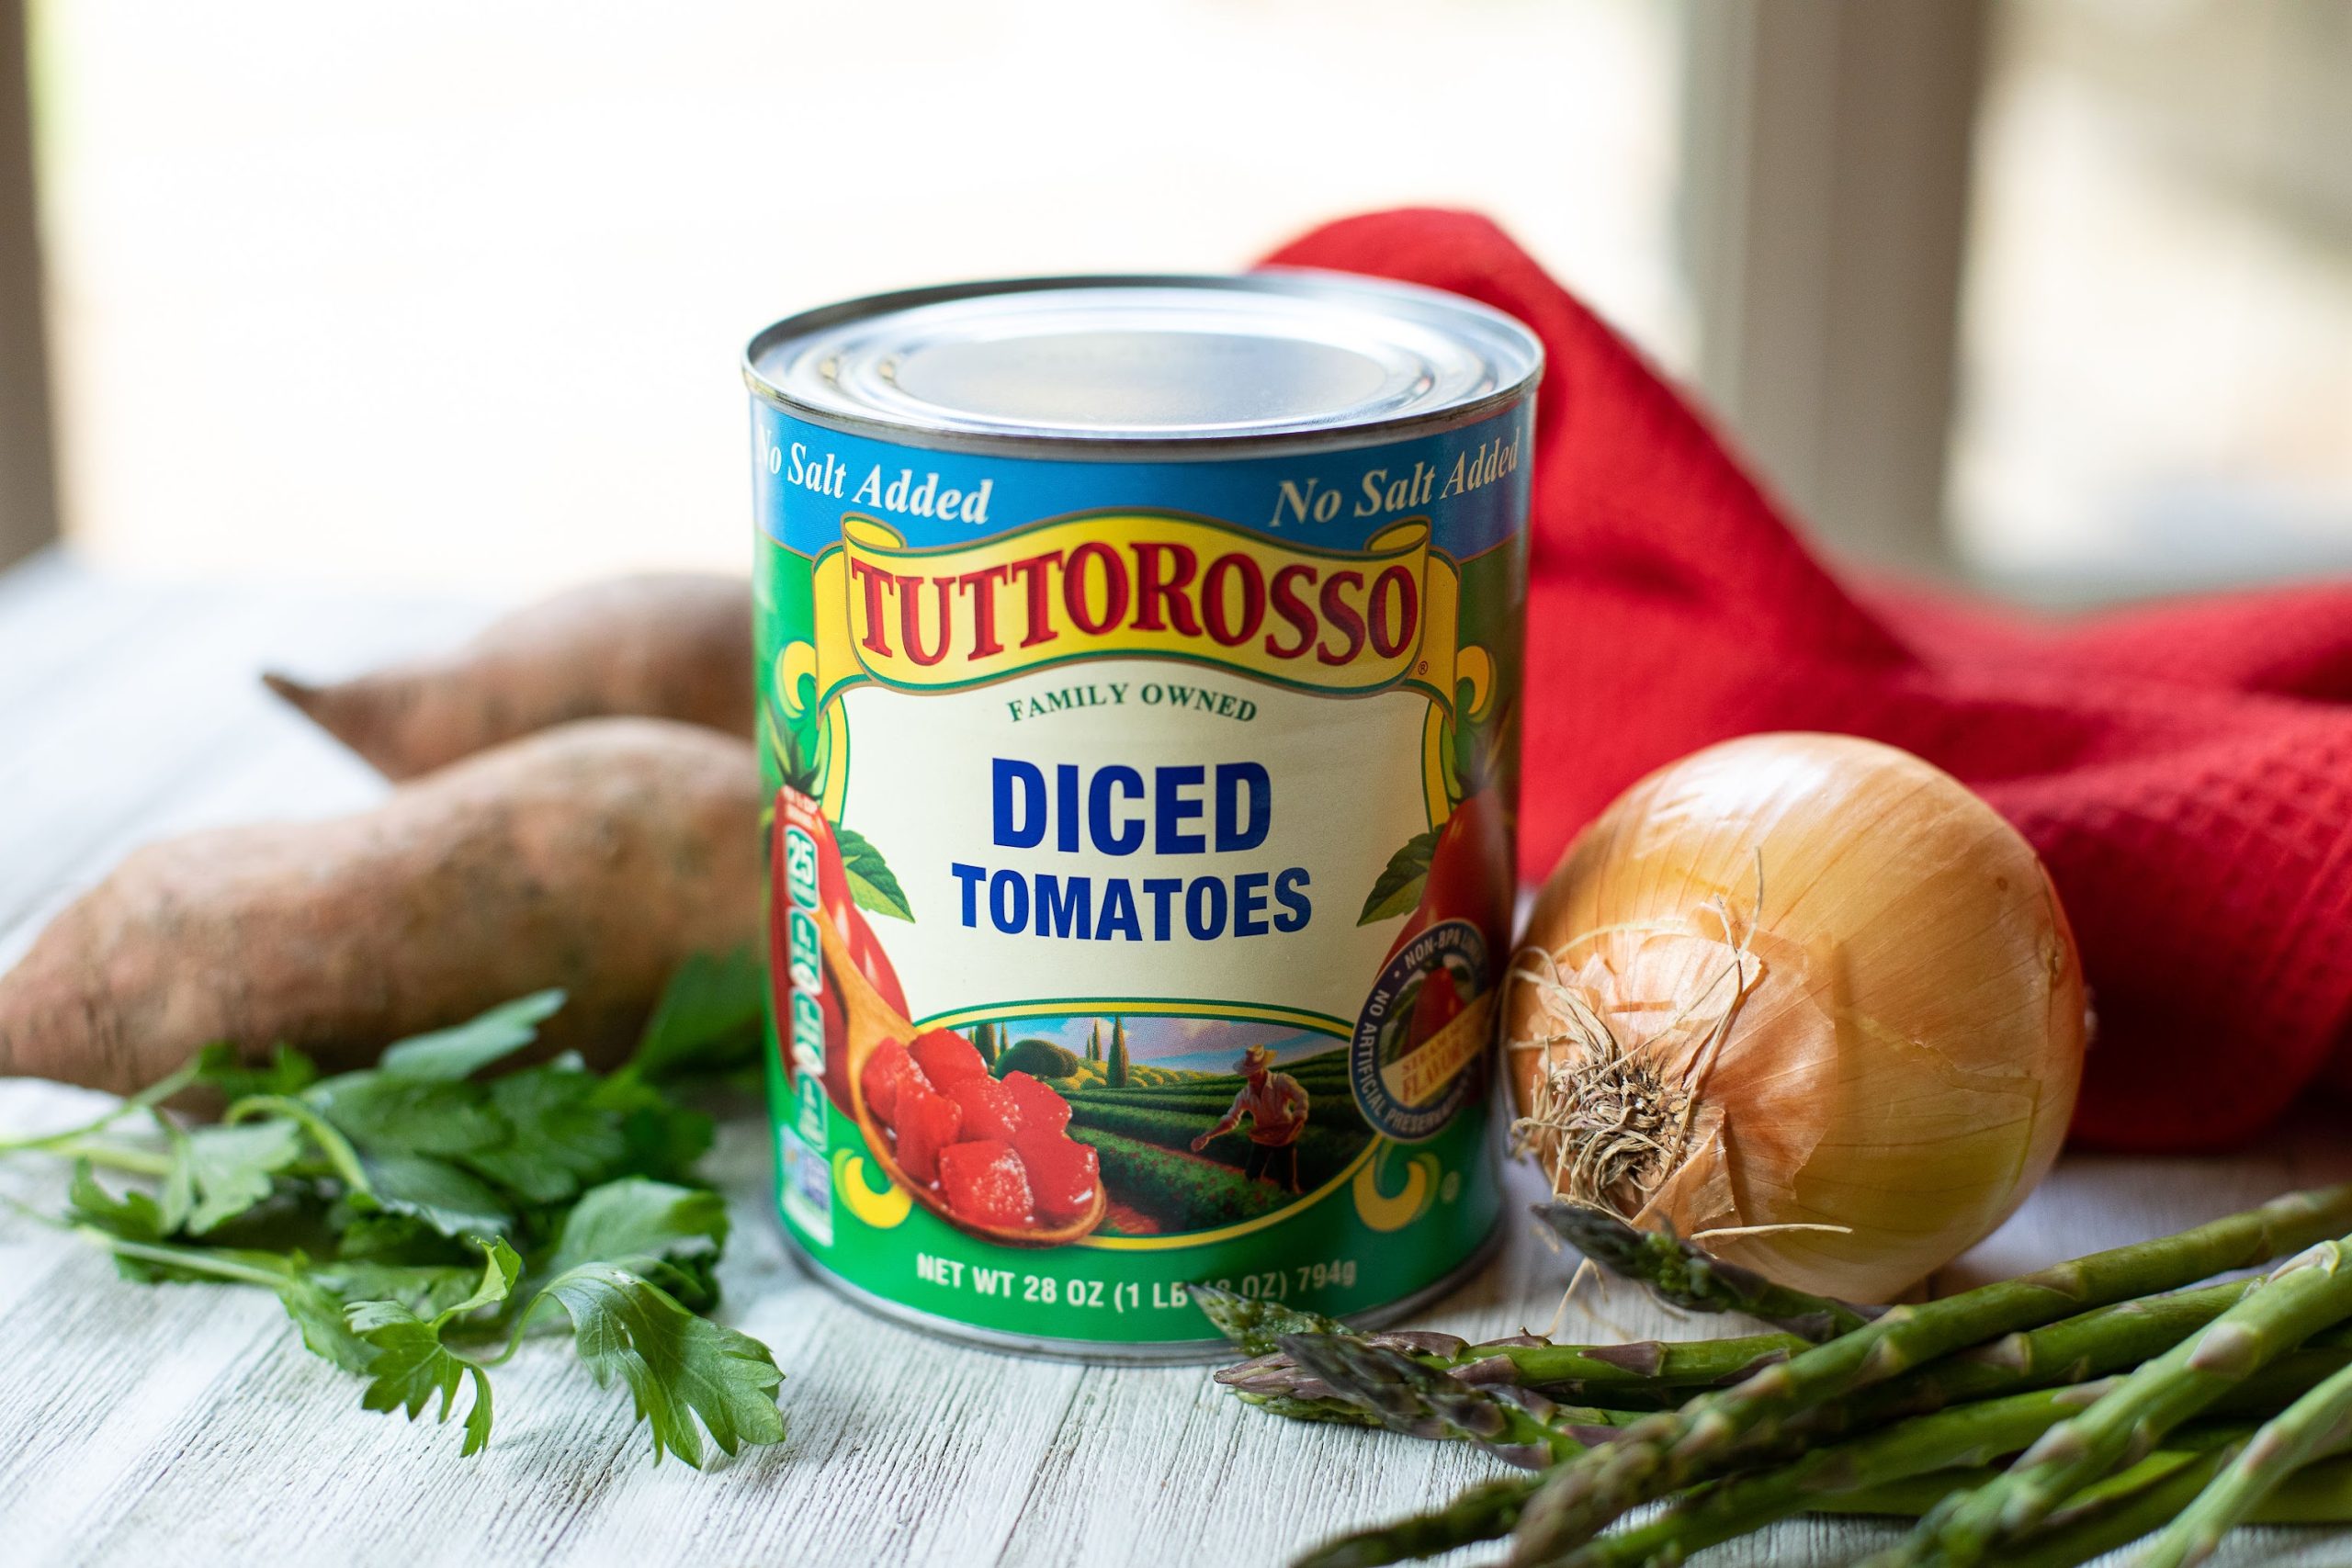 Tuttorosso Tomatoes As Low As $1.05 Per Can At Publix